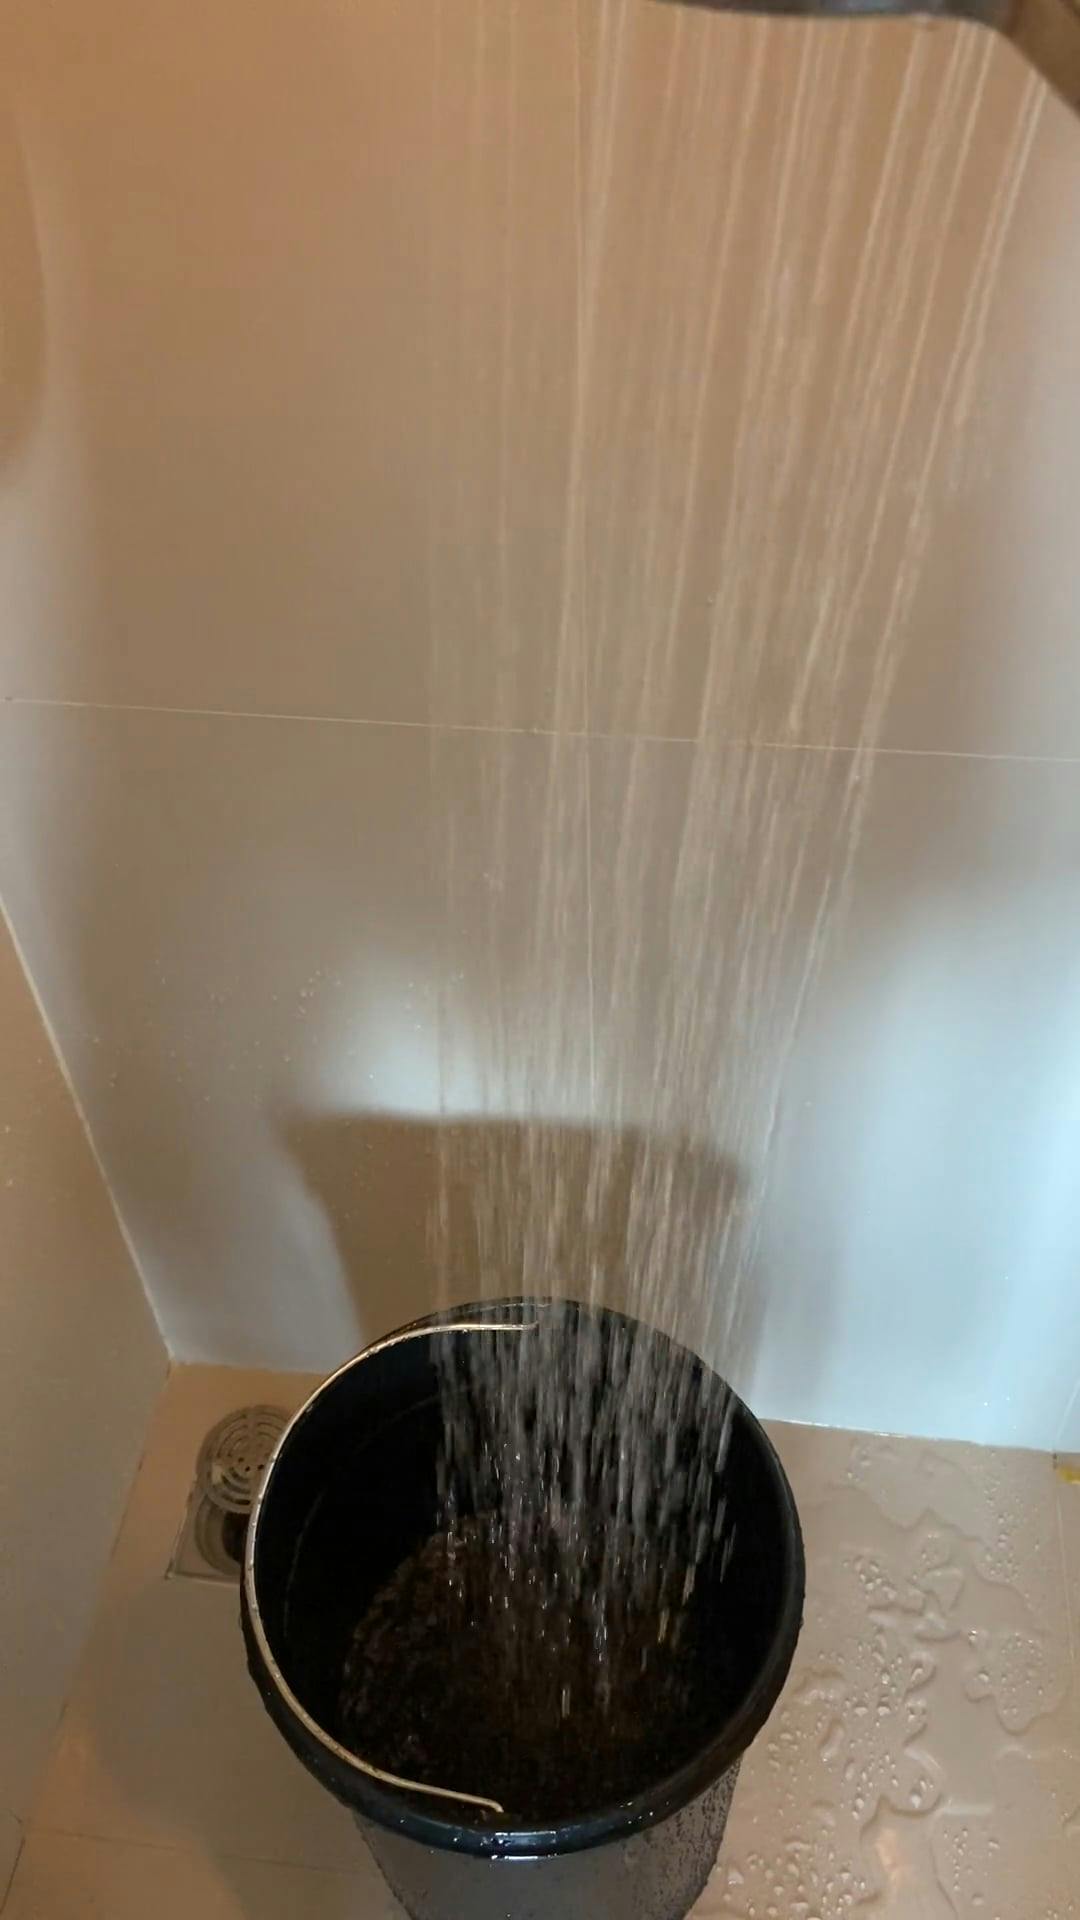 Filling Up A Bucket With Water From The Shower Head \u00b7 Free Stock Video